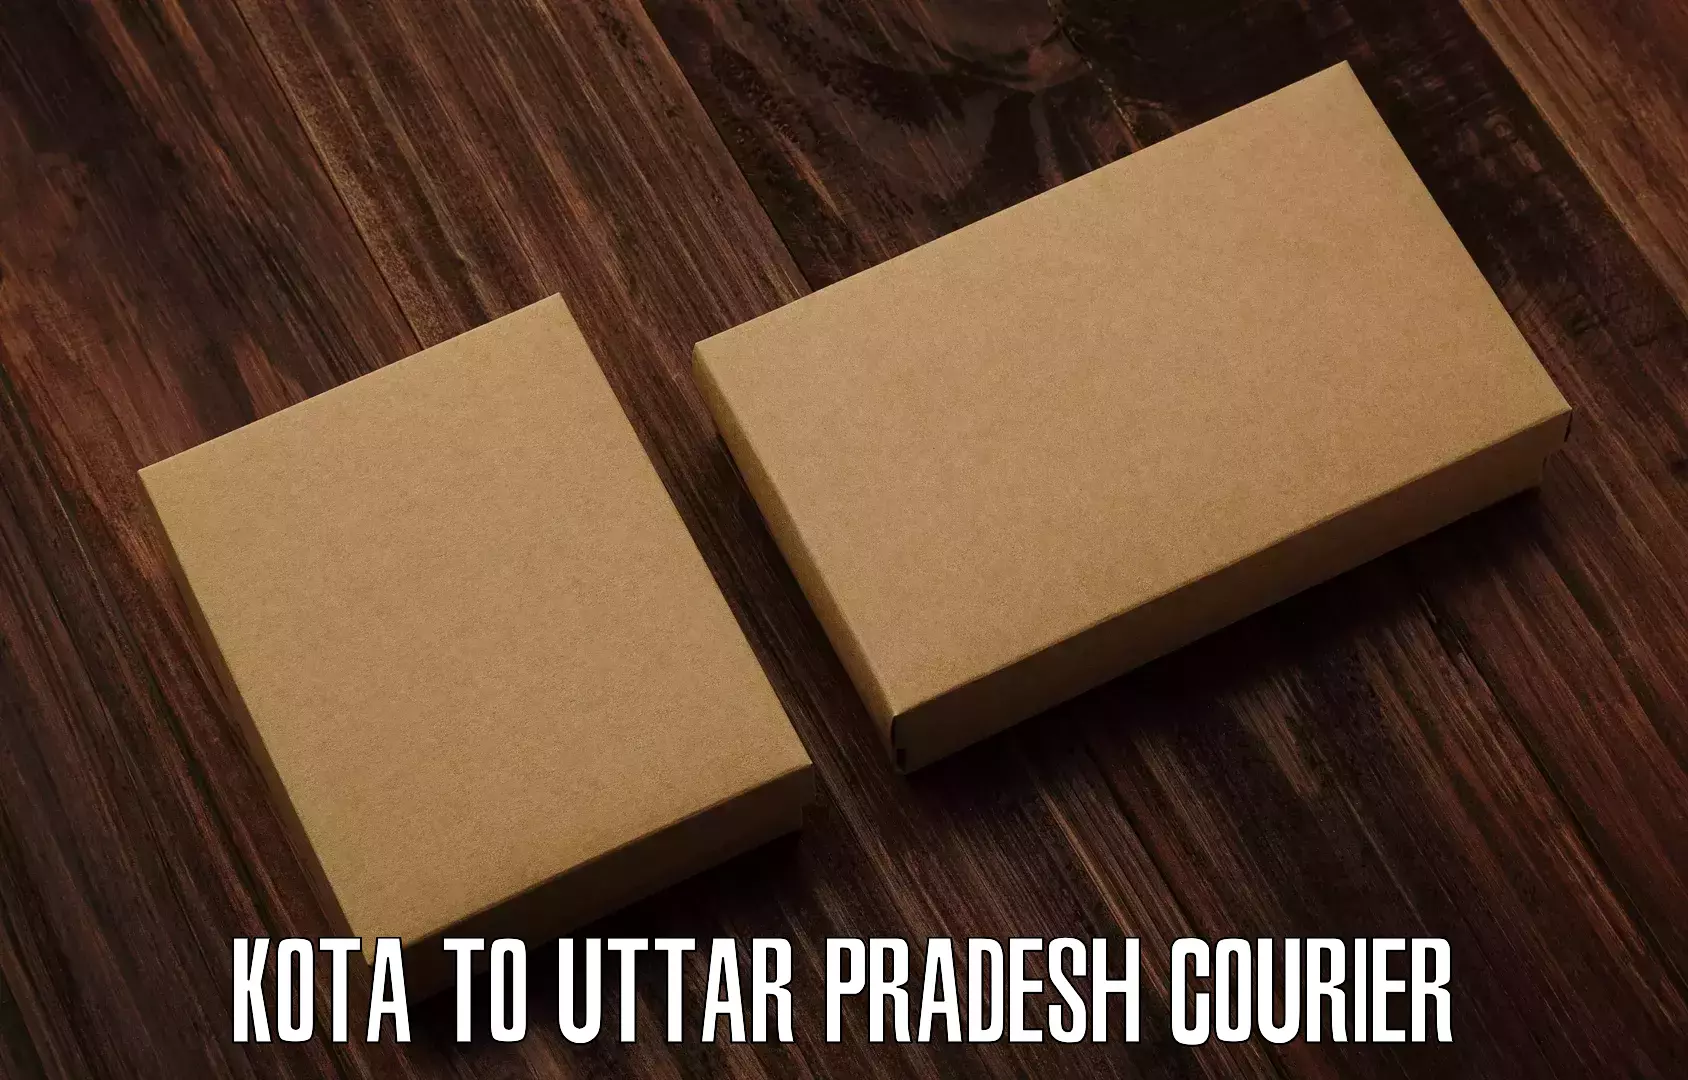 Budget-friendly shipping in Kota to Phephna